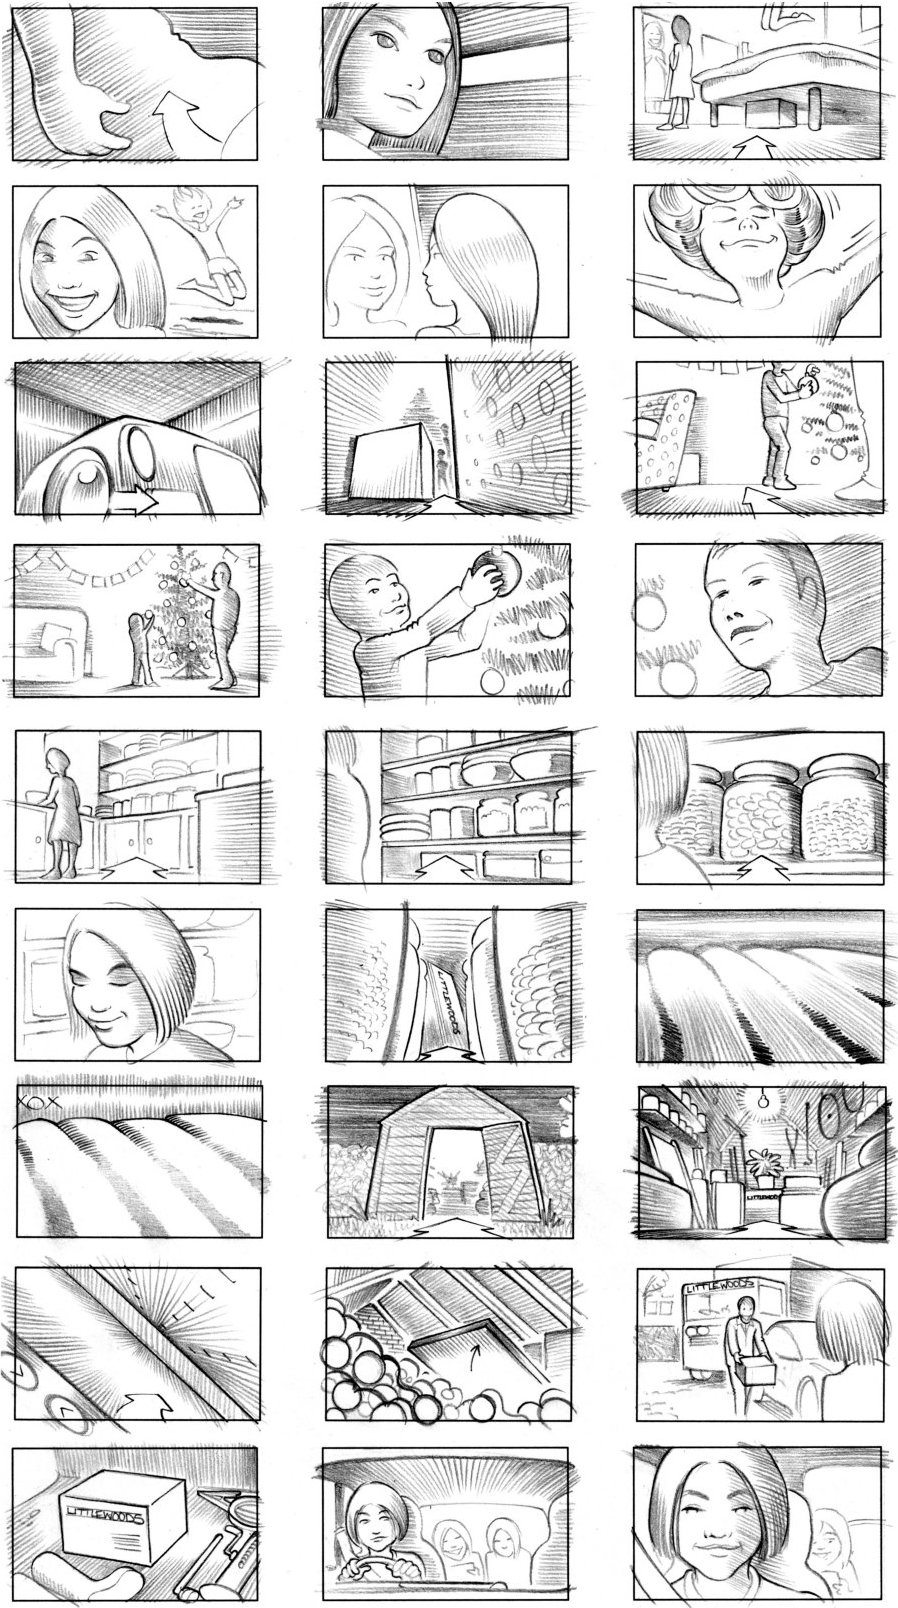 LITTLEWOODS STORYBOARD BY ANDY SPARROW